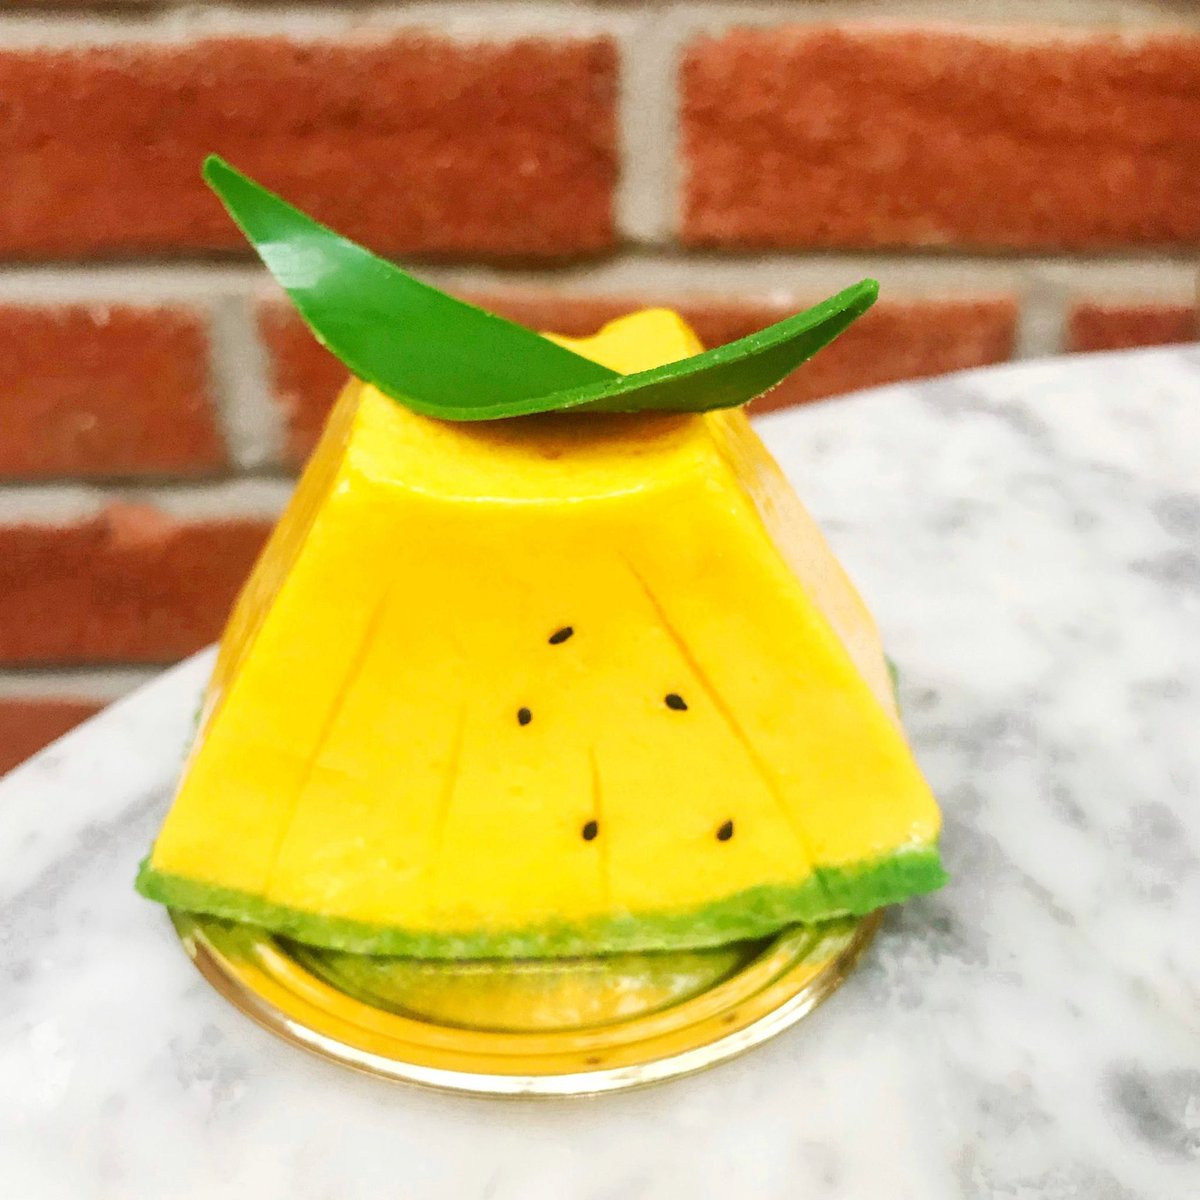 #BeattheHeat with our Pineapple Upside Down Mousse Cake! 🍍 It’s made with muscovado-infused cream with a spiced pineapple compote, pistachio joconde, and Indian Alphonso mango mousse. #Summer #DABLondon